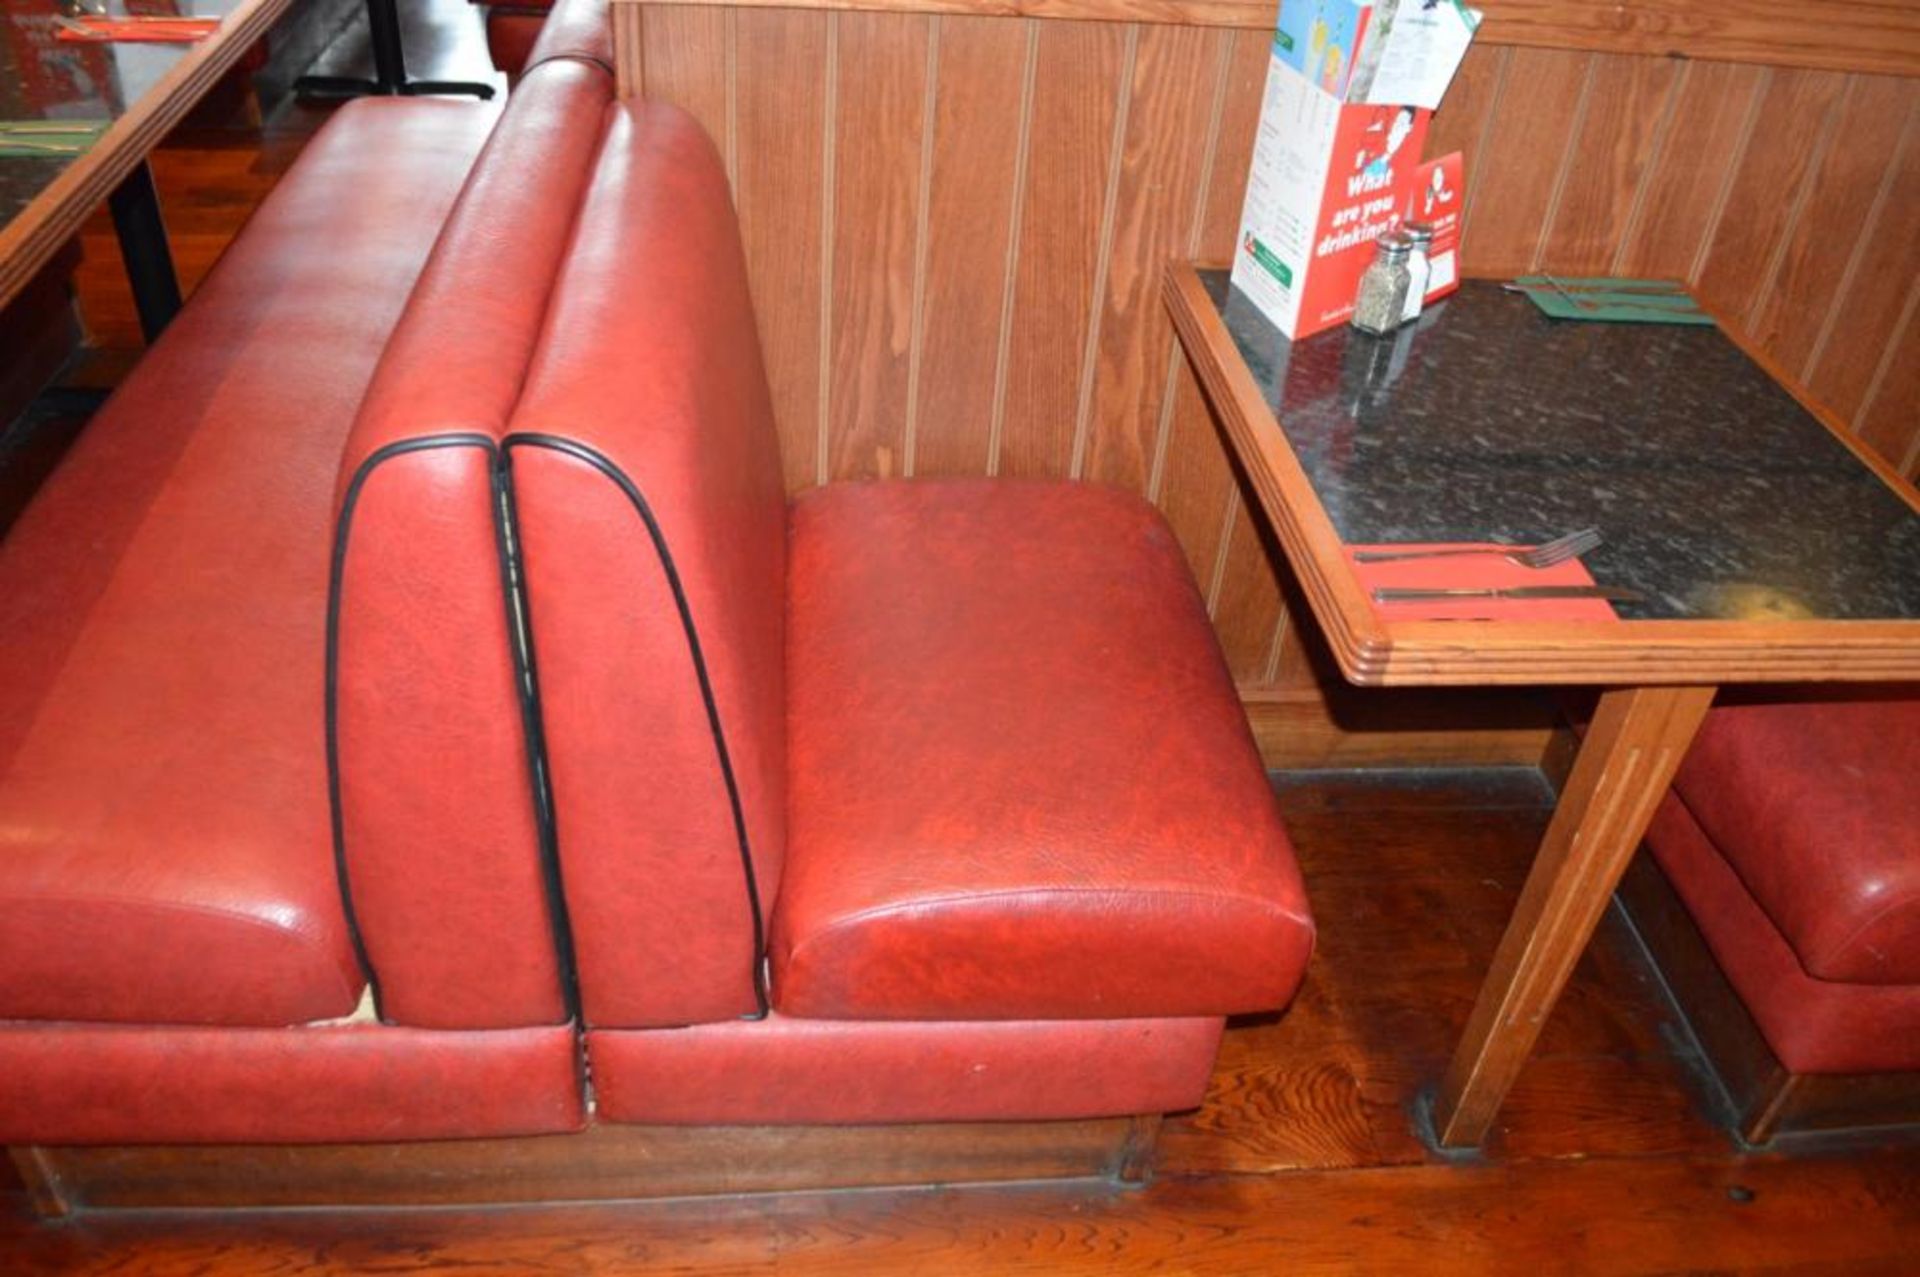 1 x Selection of Cosy Bespoke Seating Booths in a 1950's Retro American Diner Design With Dining Tab - Image 16 of 30